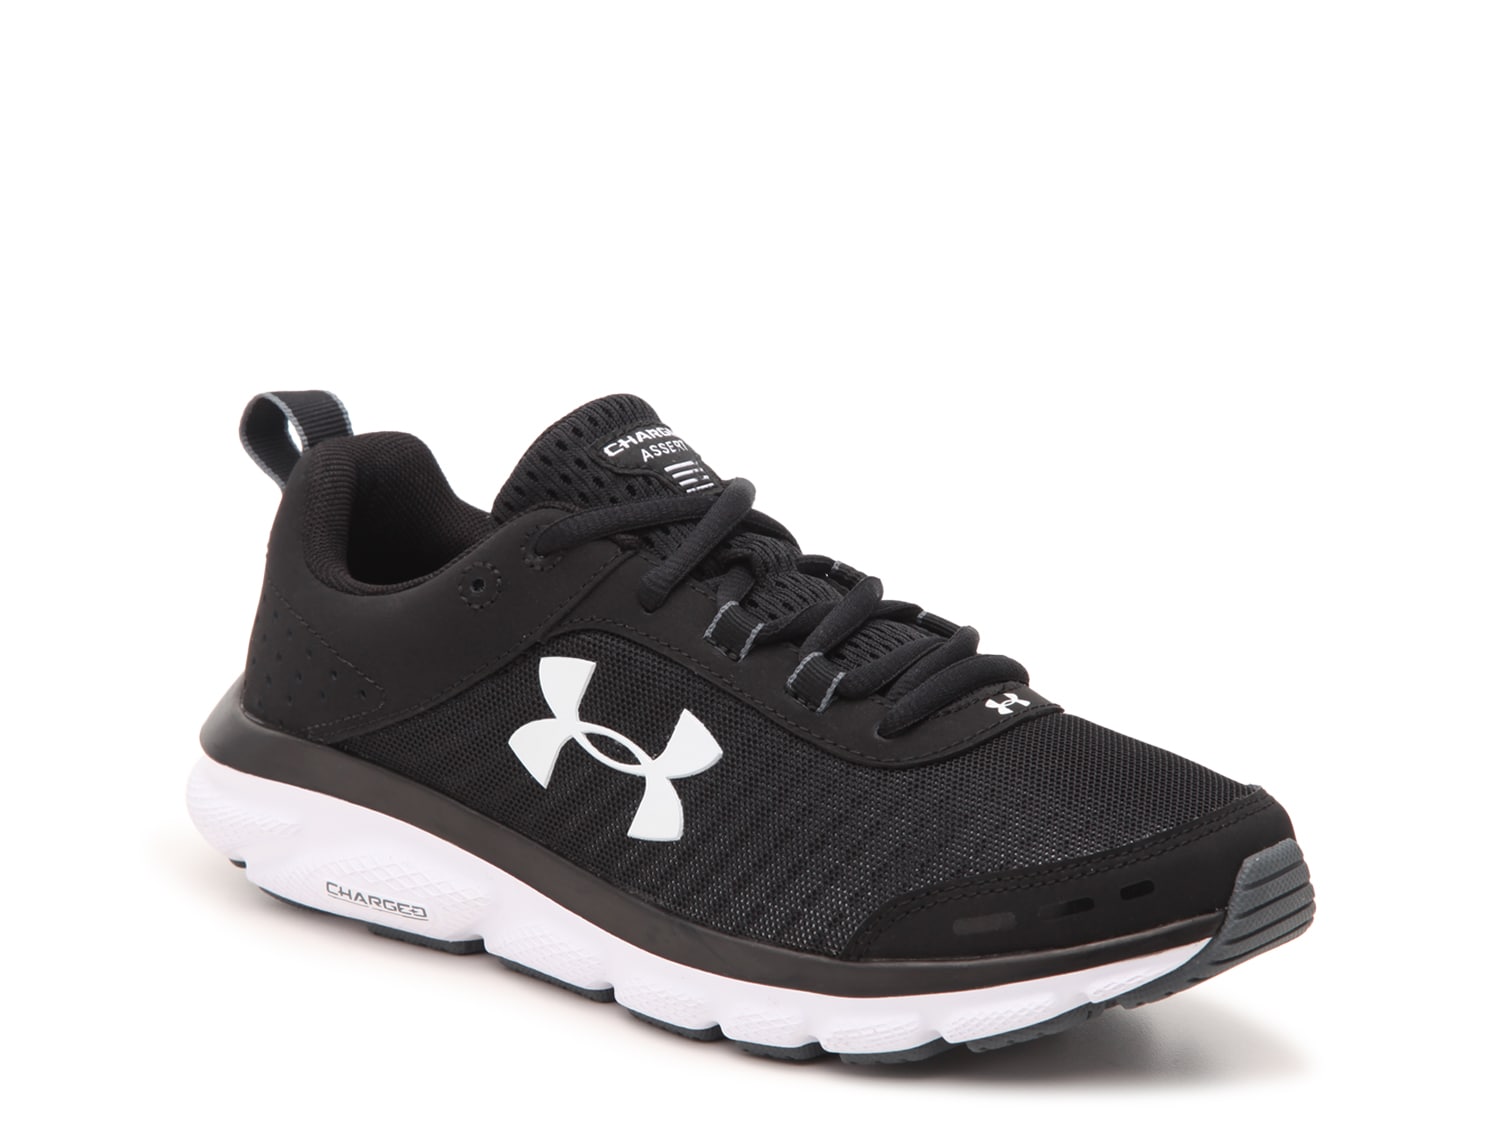 Under Armour Shoes & Sneakers | Running & Tennis Shoes | DSW